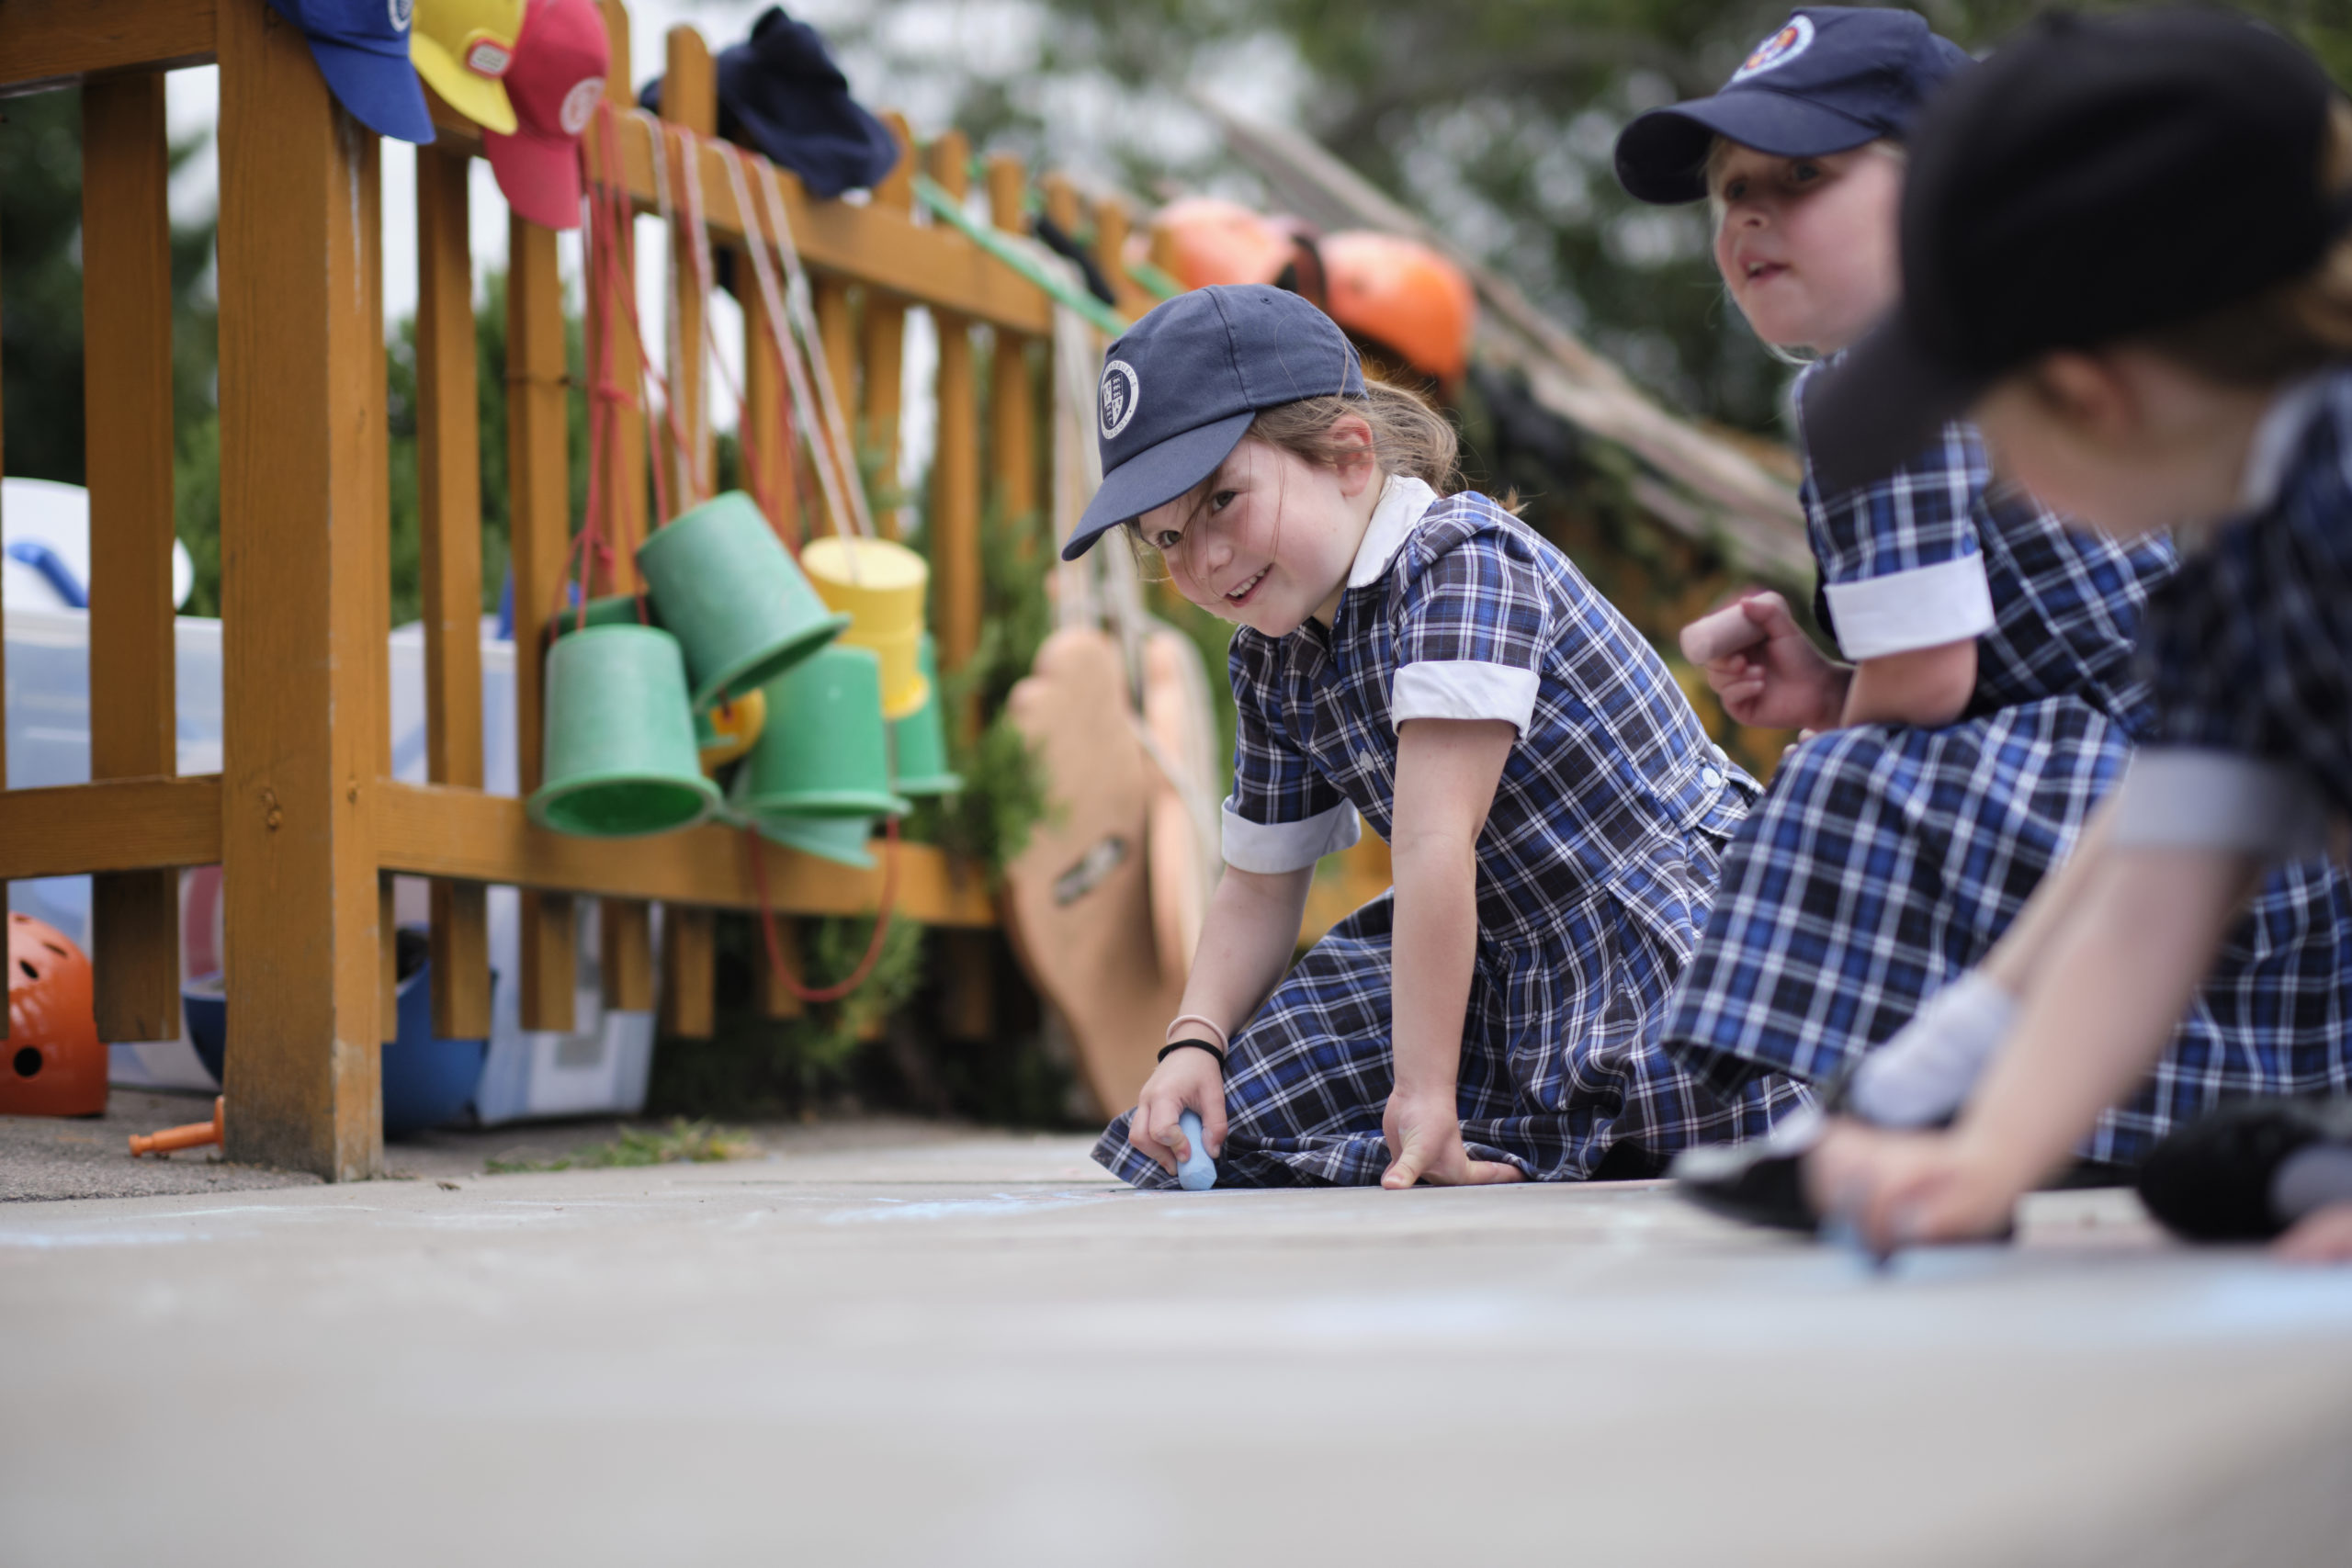 The outdoor facilities at our nurseries allow our children to explore and play in nature